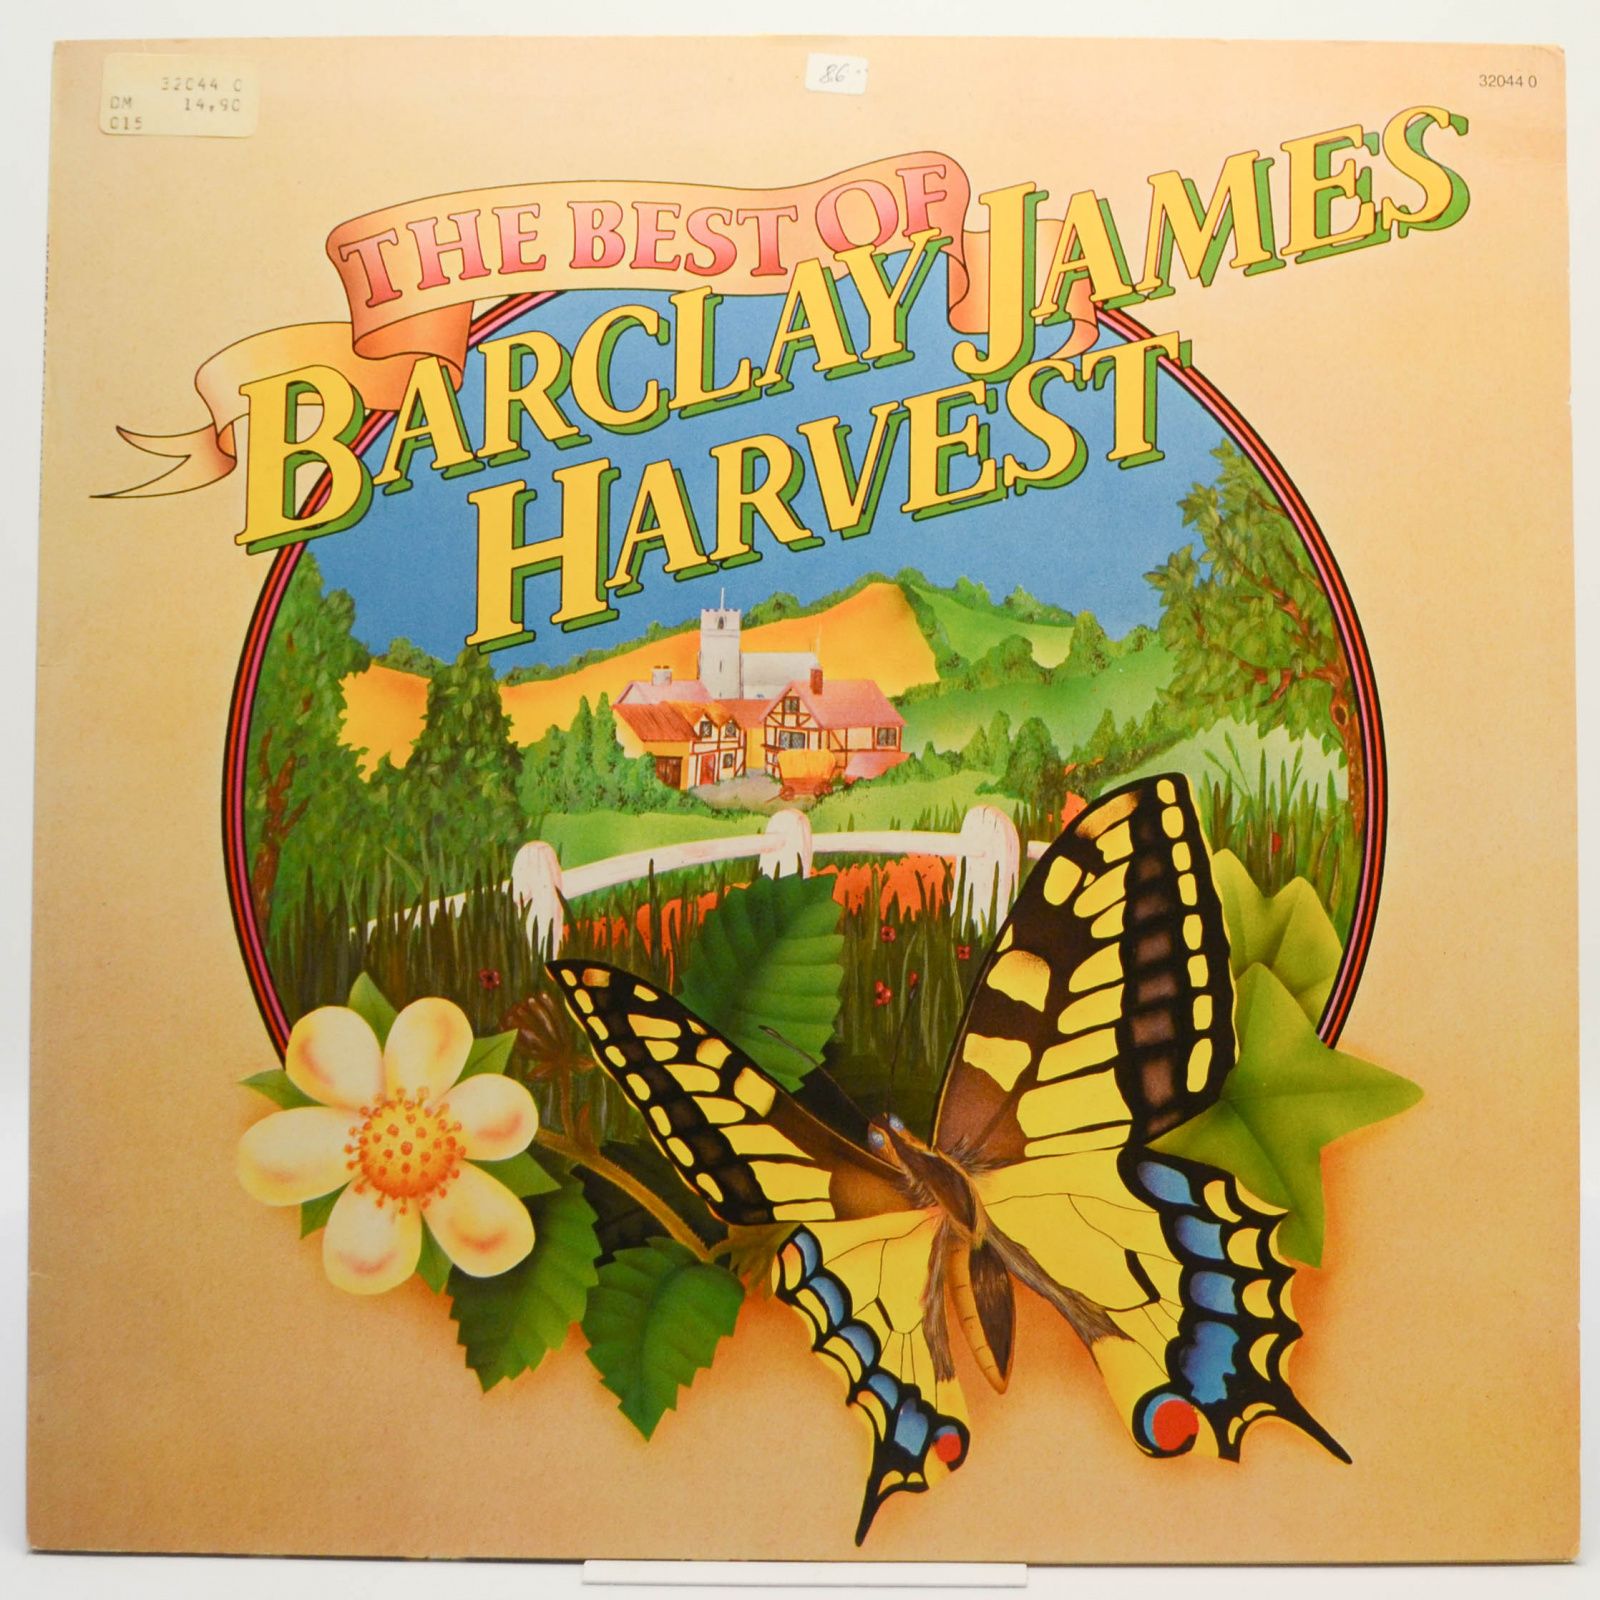 The Best Of Barclay James Harvest, 1977